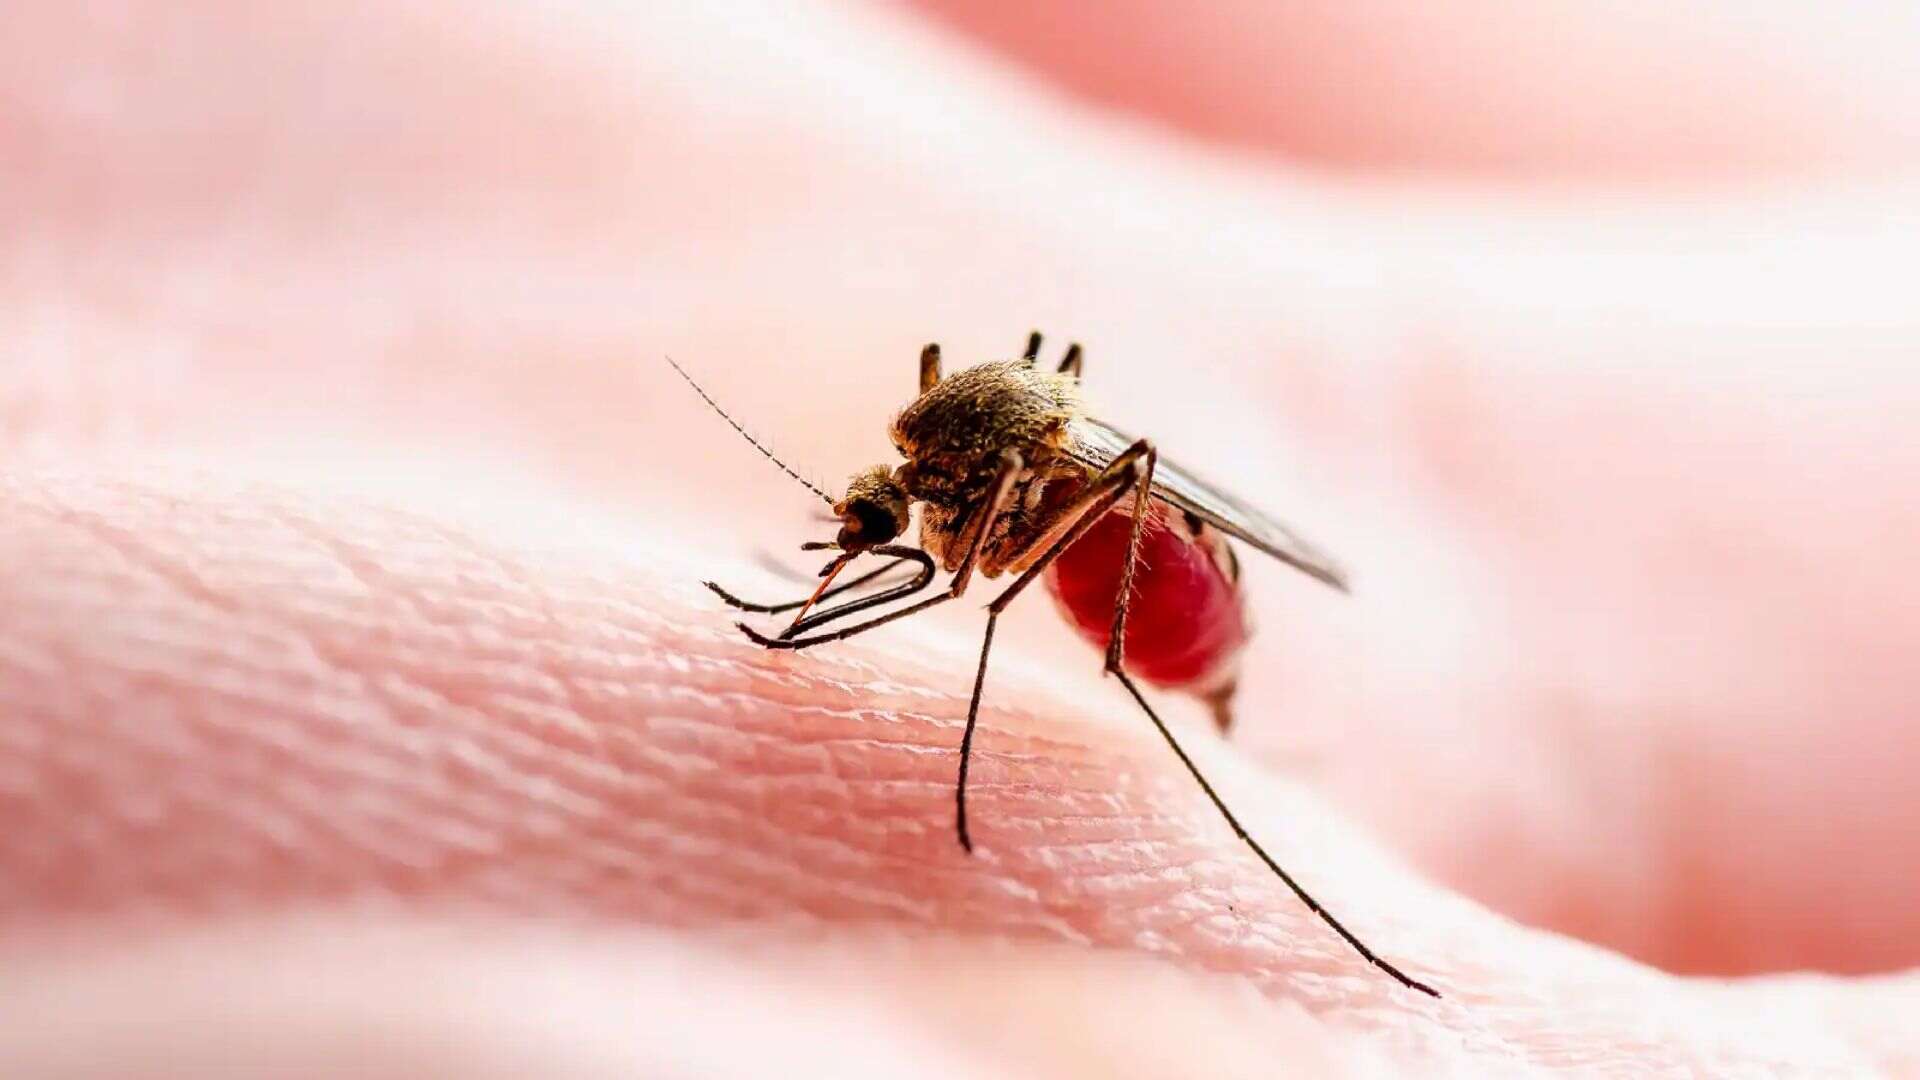 Pak: Dengue Outbreak Claims 14 Lives in Turbat, Over 5,000 Infected in Kech